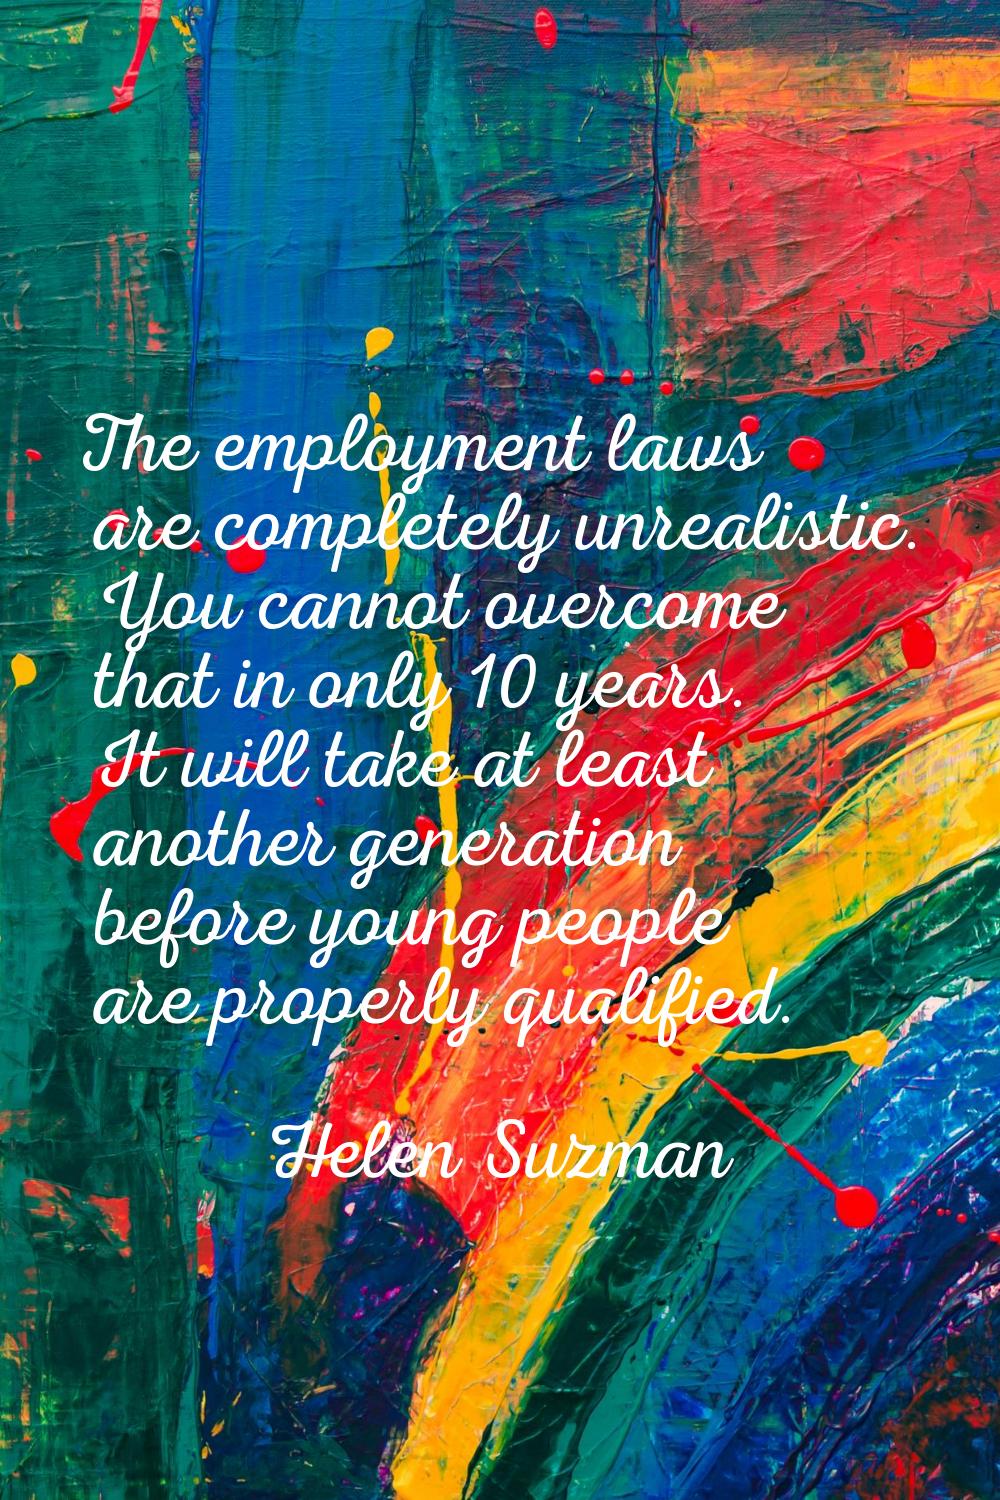 The employment laws are completely unrealistic. You cannot overcome that in only 10 years. It will 